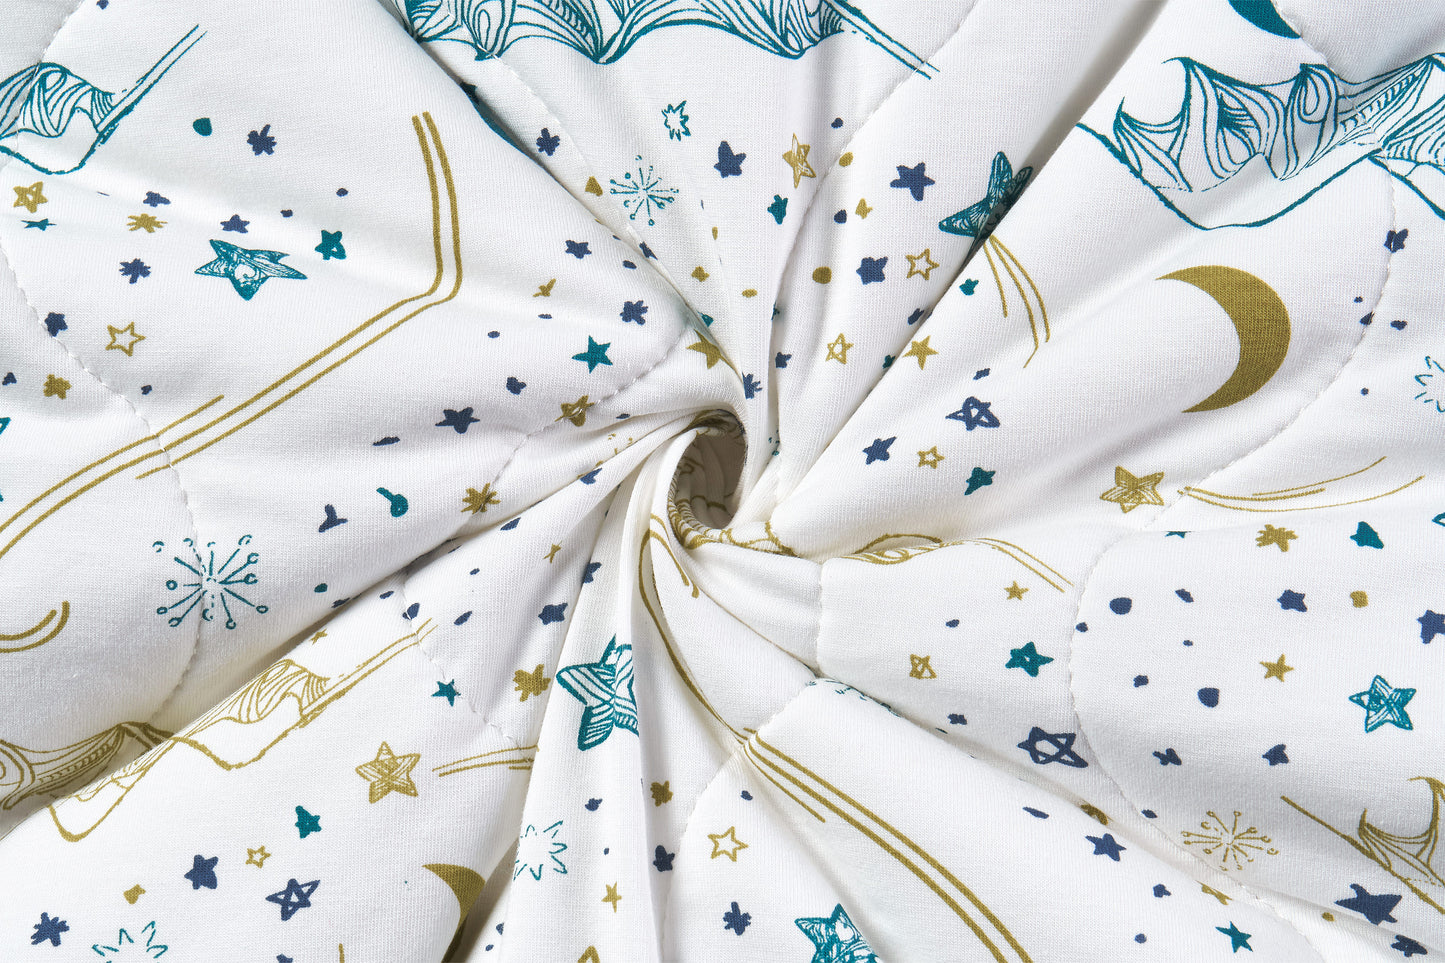 Small Quilted Winter Blanket 3.2 TOG (Bamboo Jersey) - Stars White